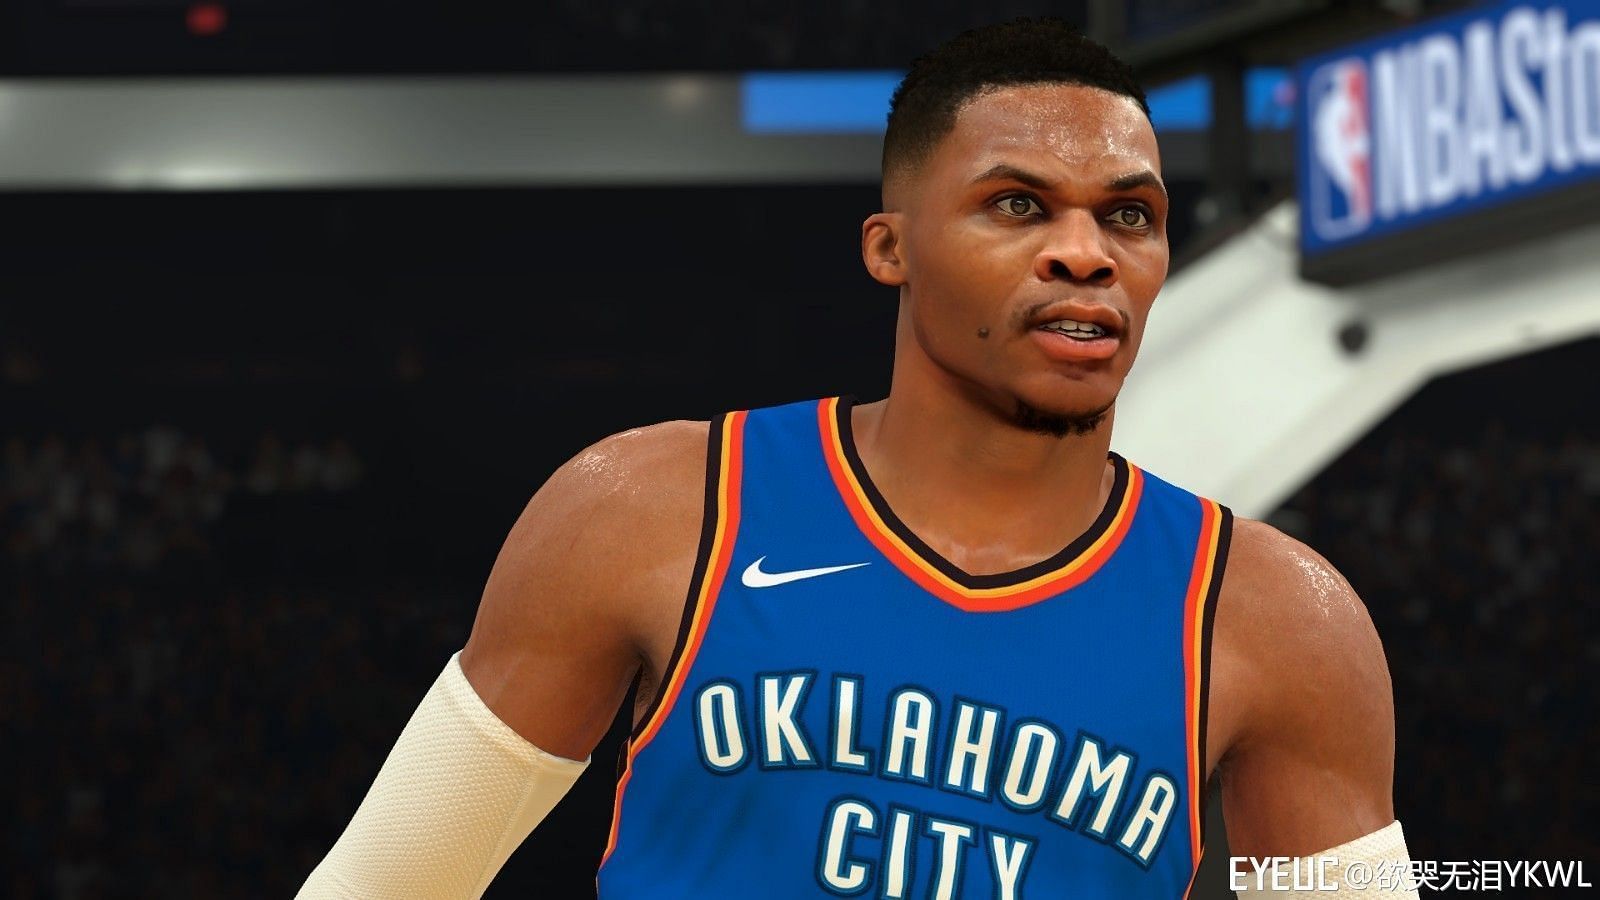 Russell Westbrook with the OKC Thunder as seen in NBA 2K19 [Source: ModdingWay]